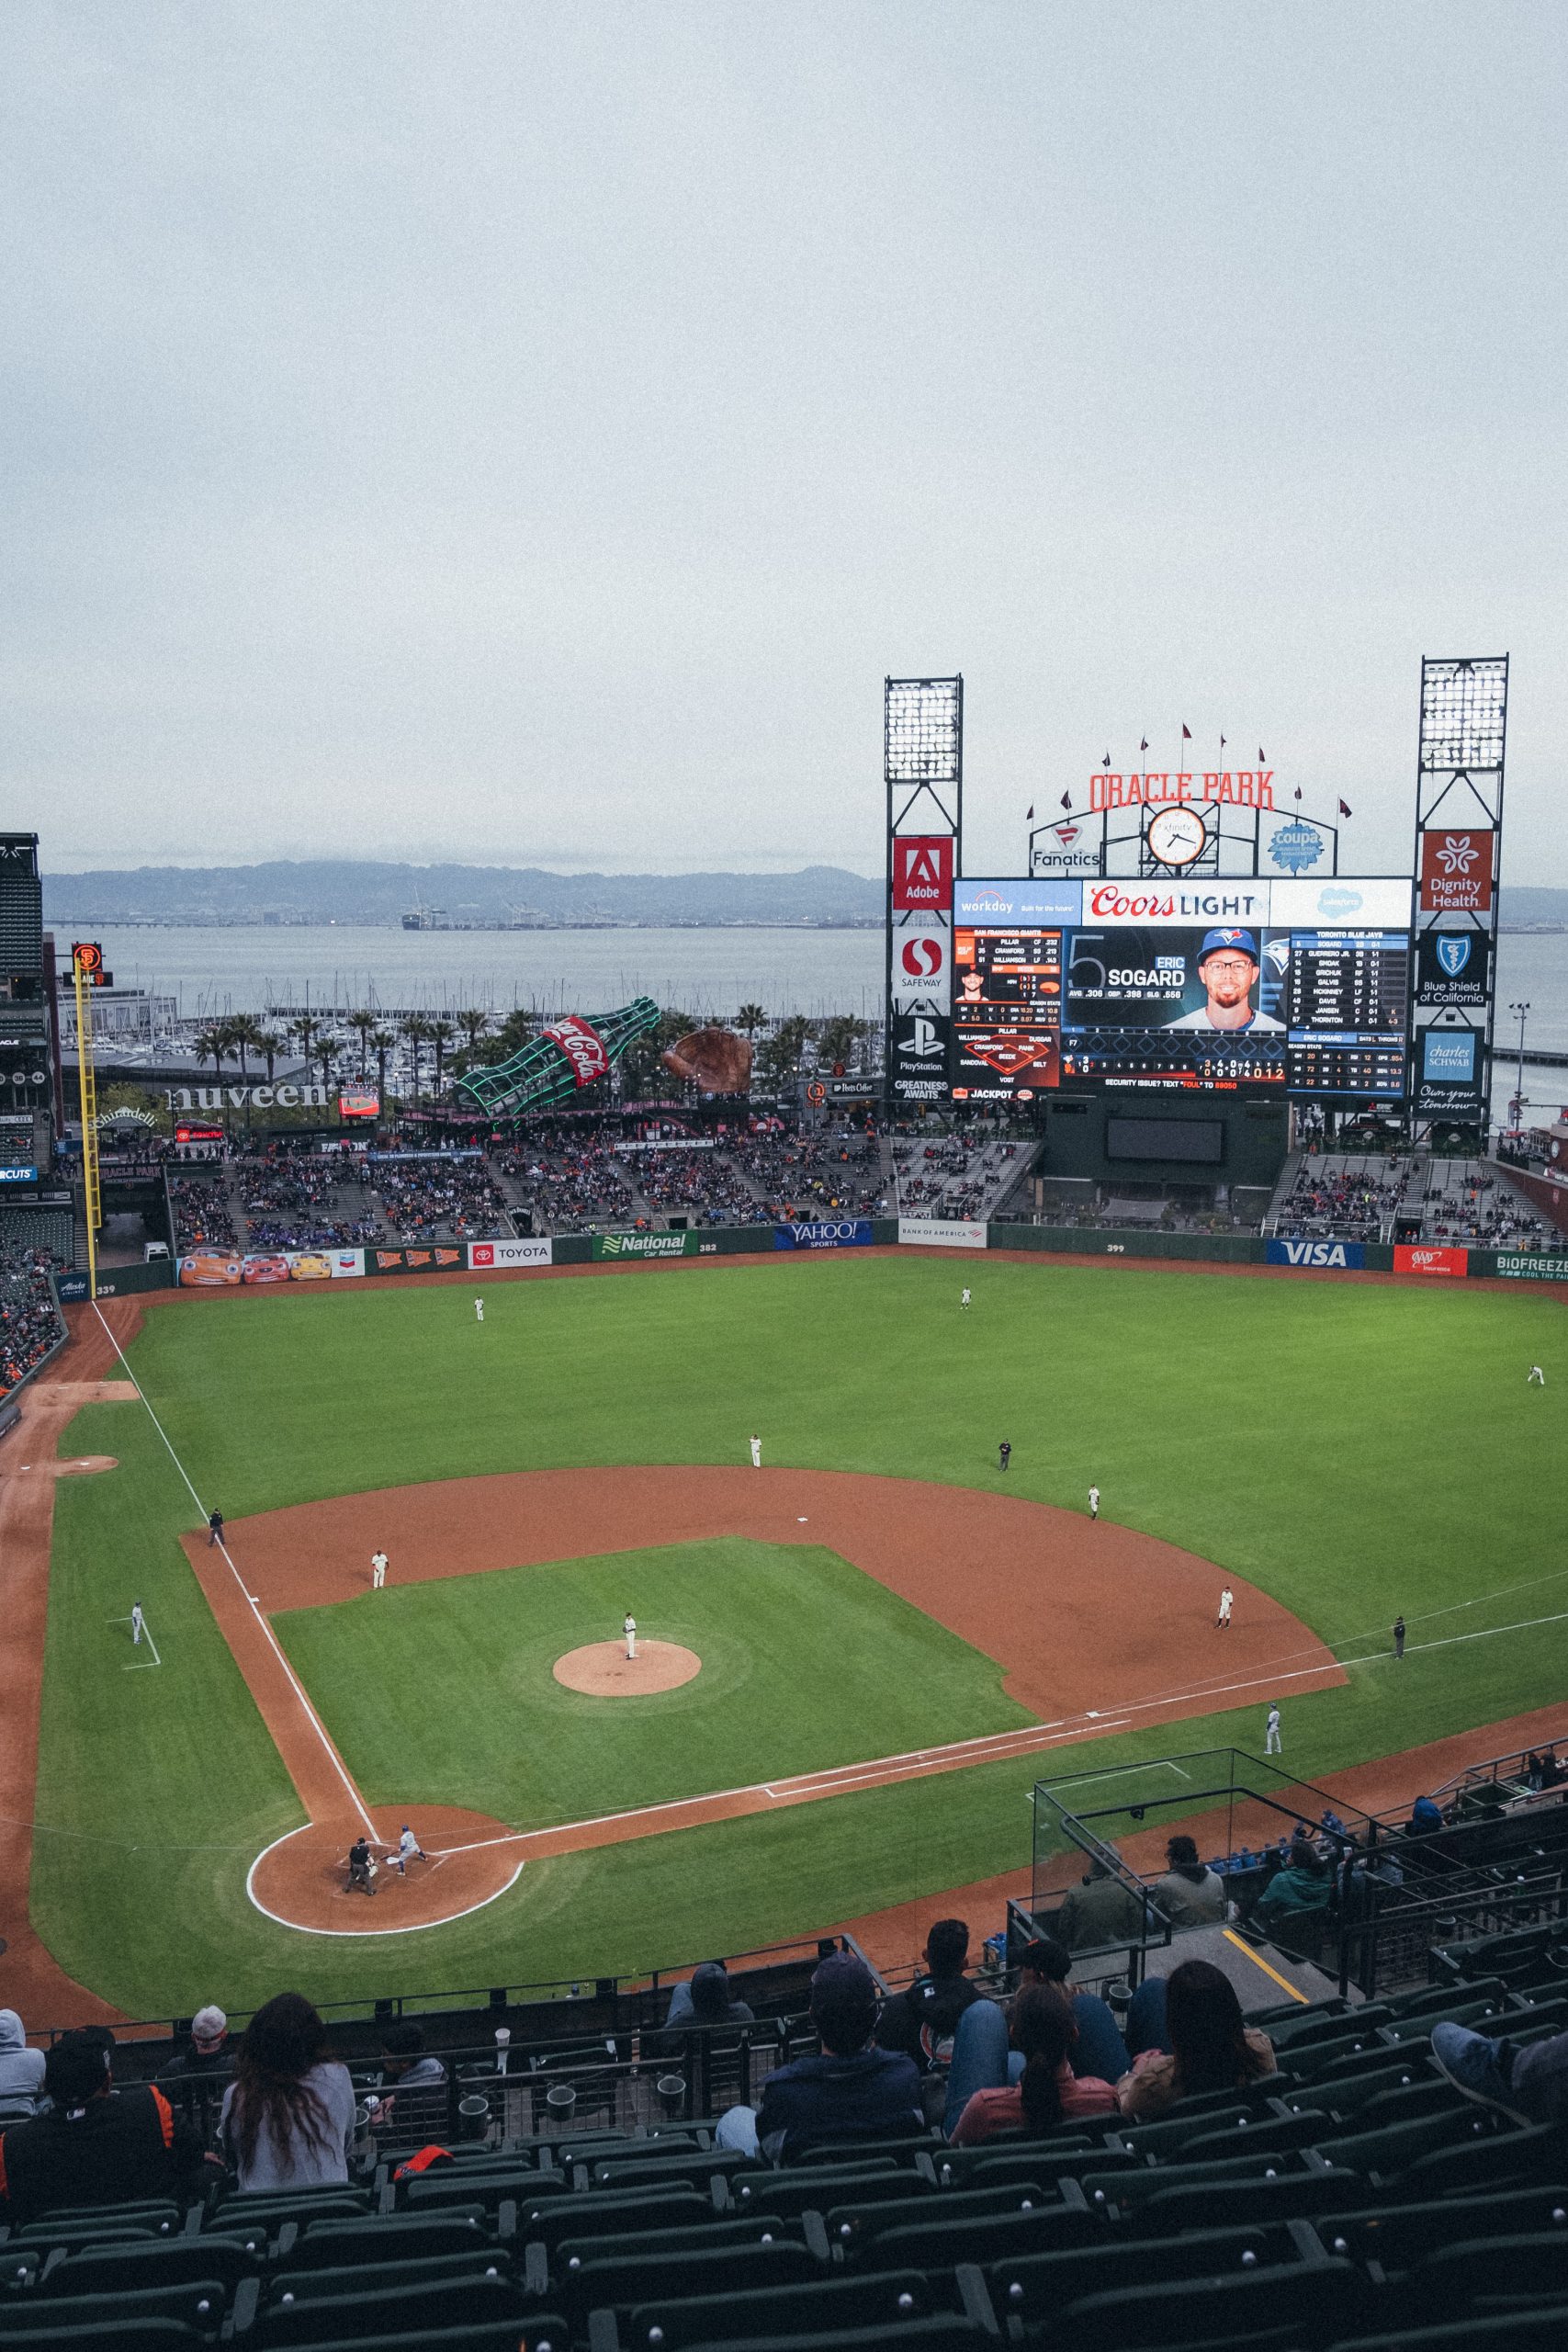 Picture of Oracle Park looking toward McCovey Cove, with a Giants baseball game underway